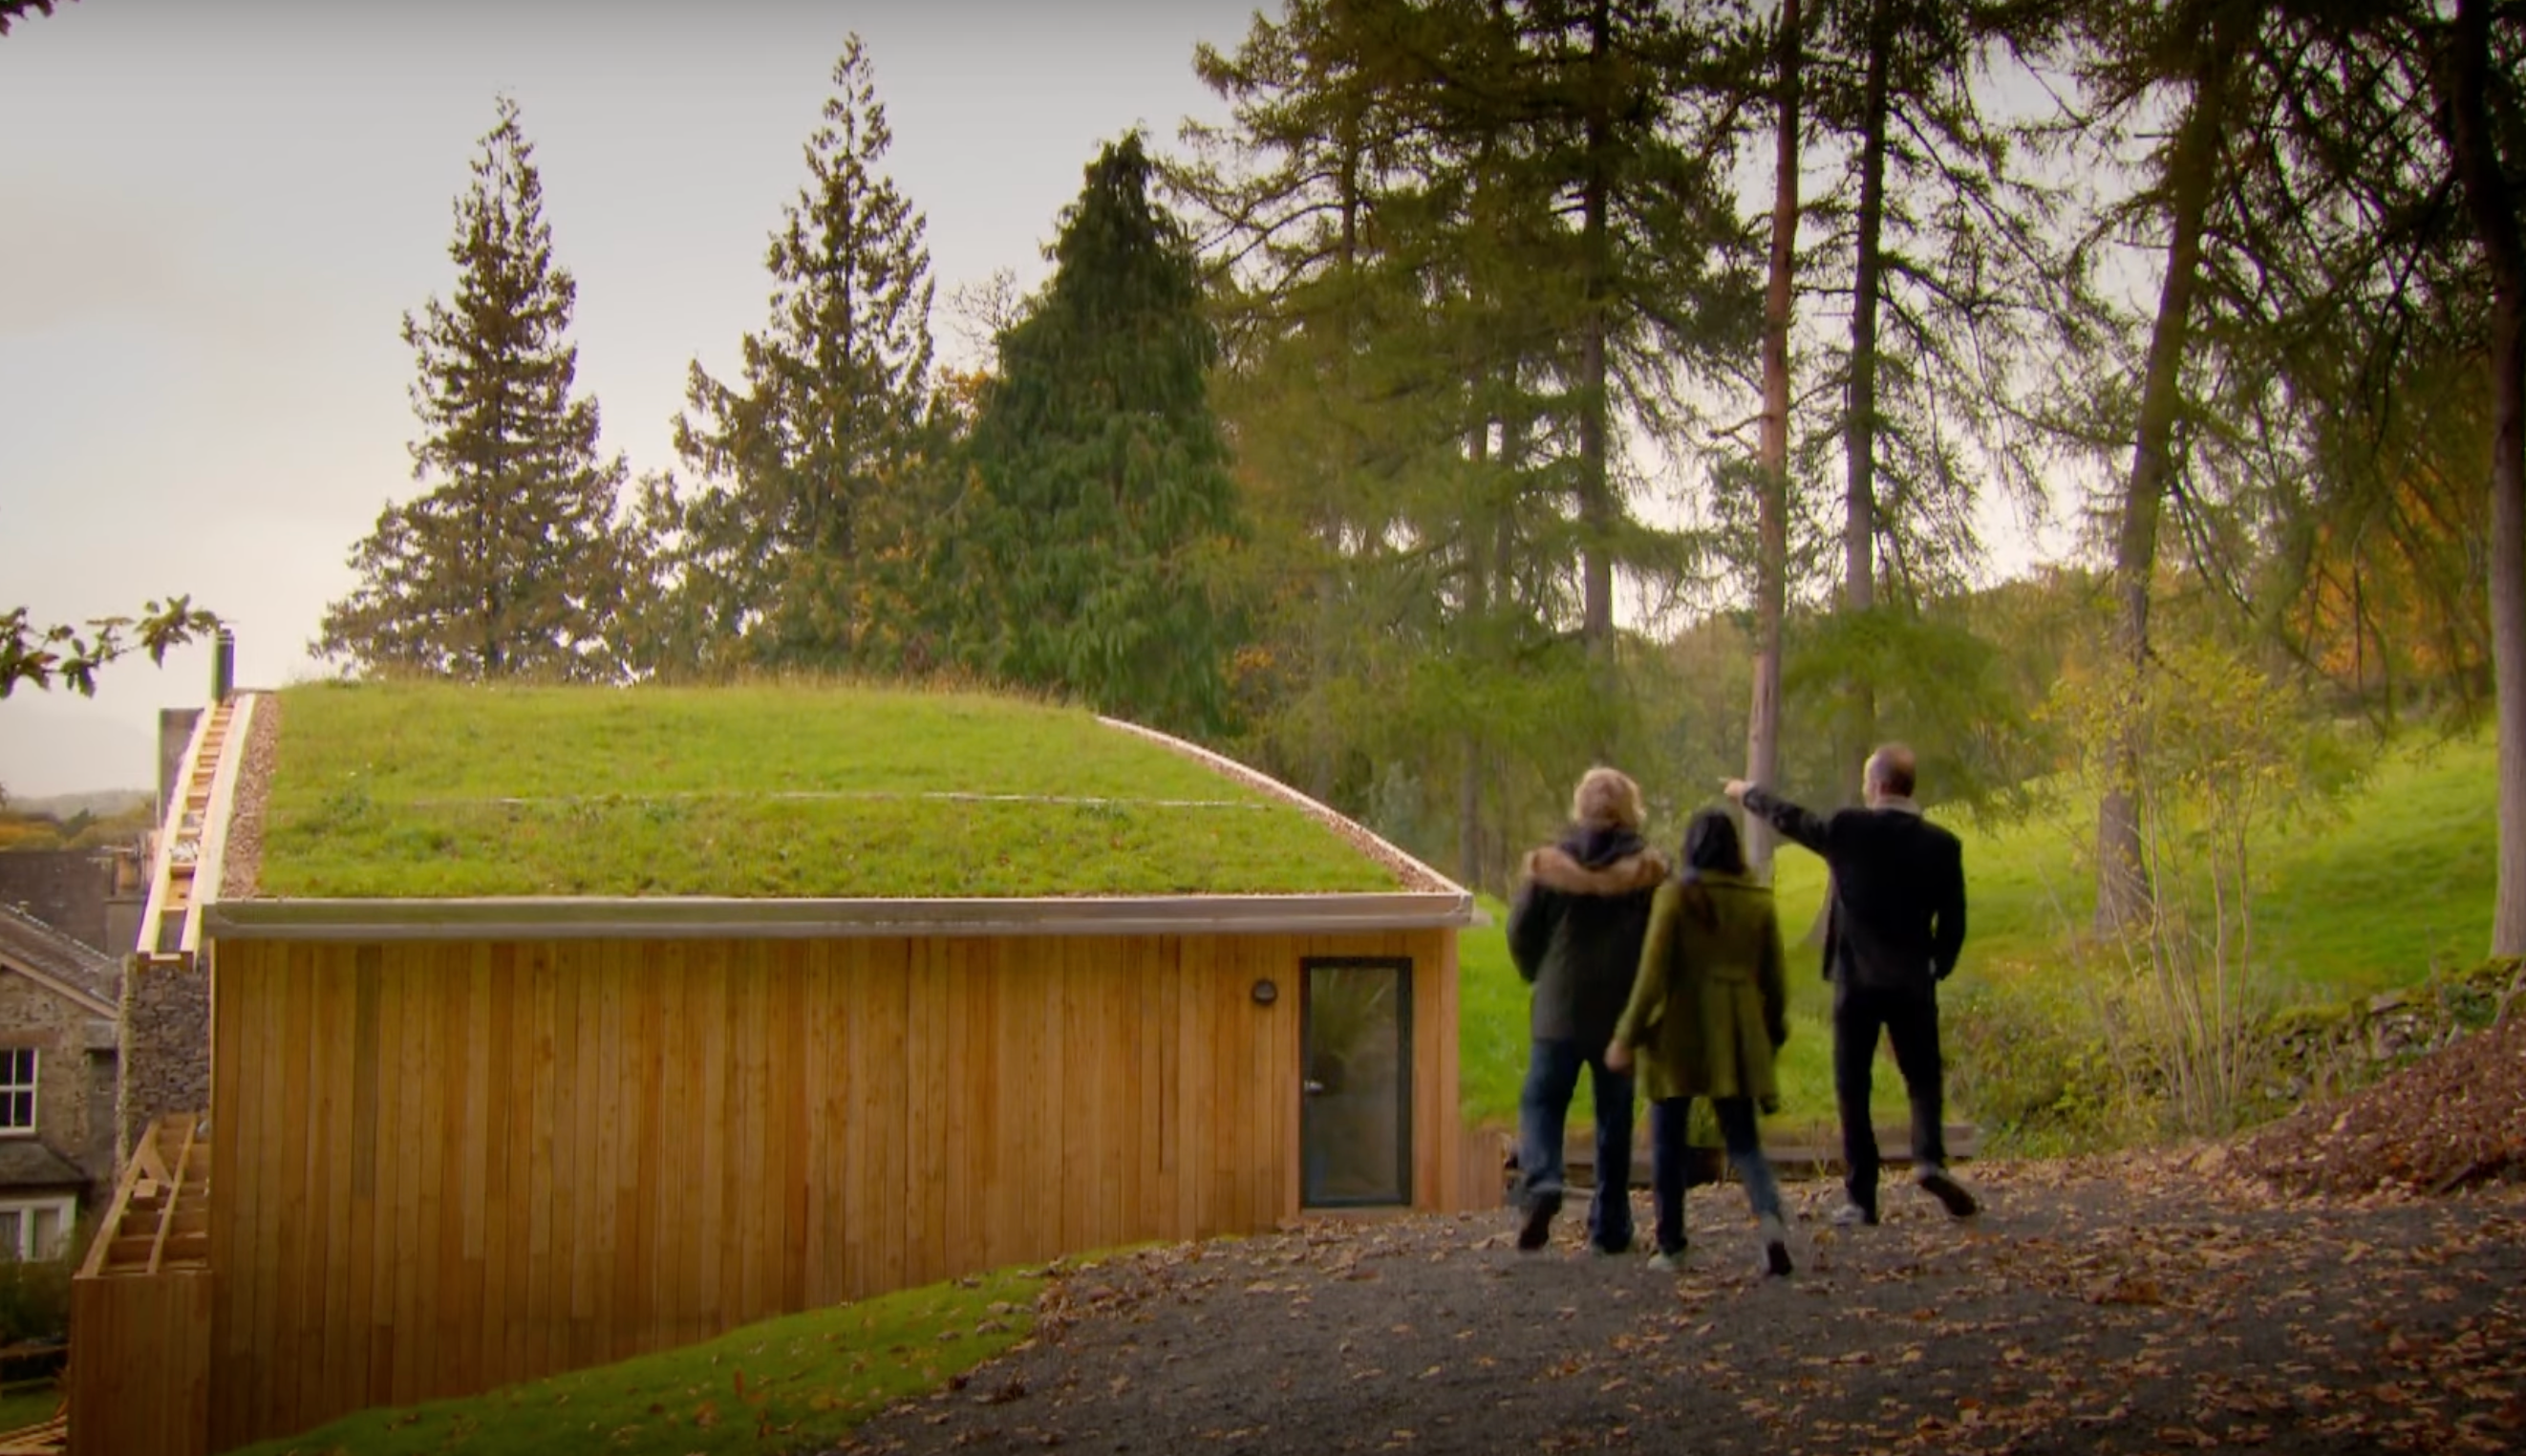 An ecological roof helps the house blend into its surroundings.